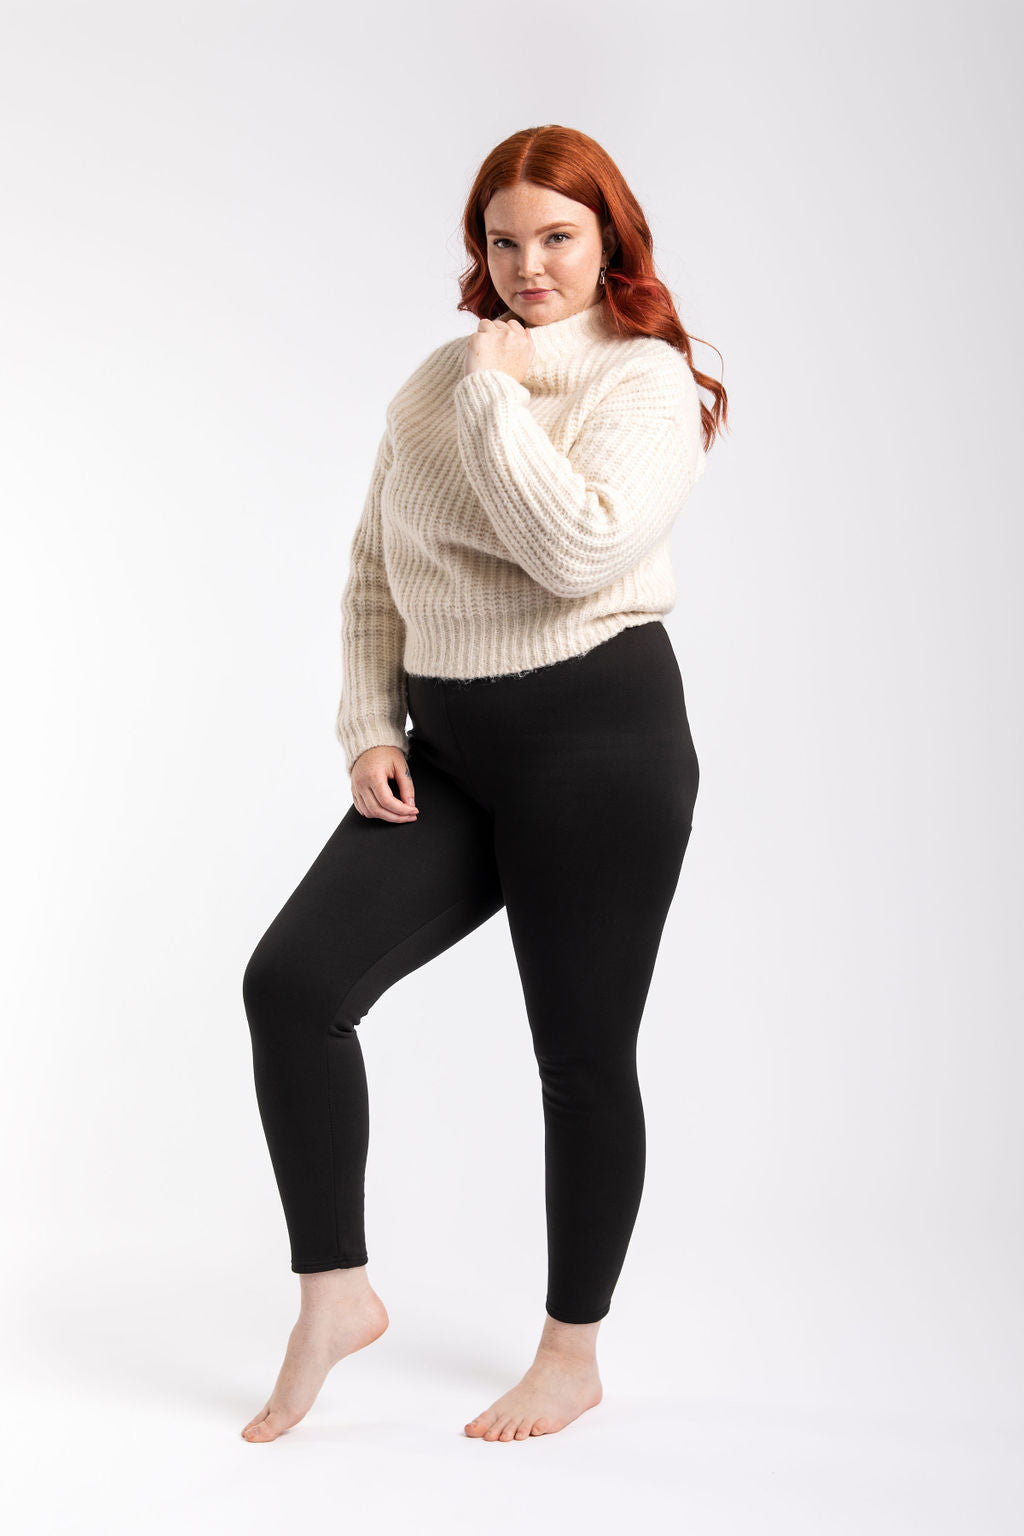 Black Thick Leggings Stretchy Fabric Not See Through Warm and Comfy